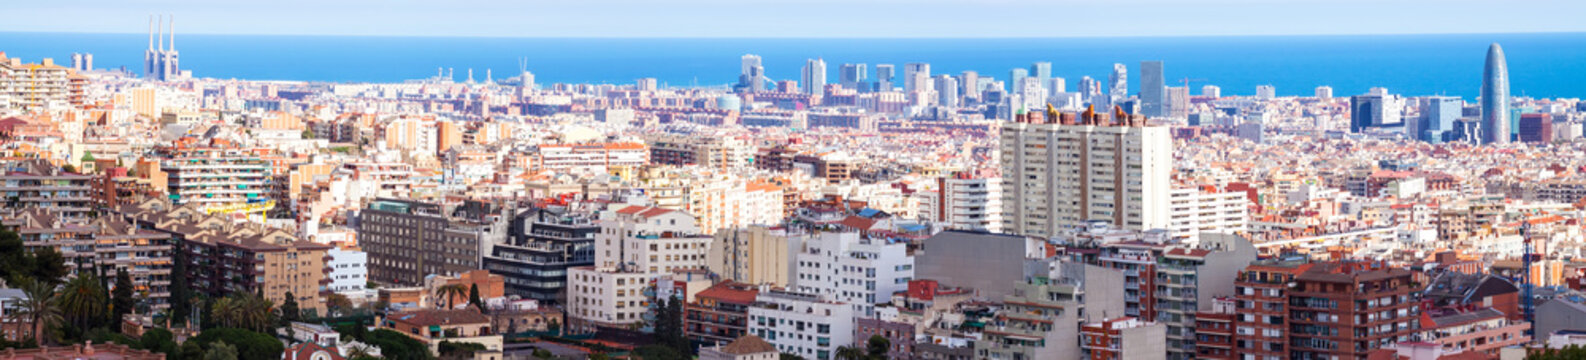 residence district in Barcelona in sunny day